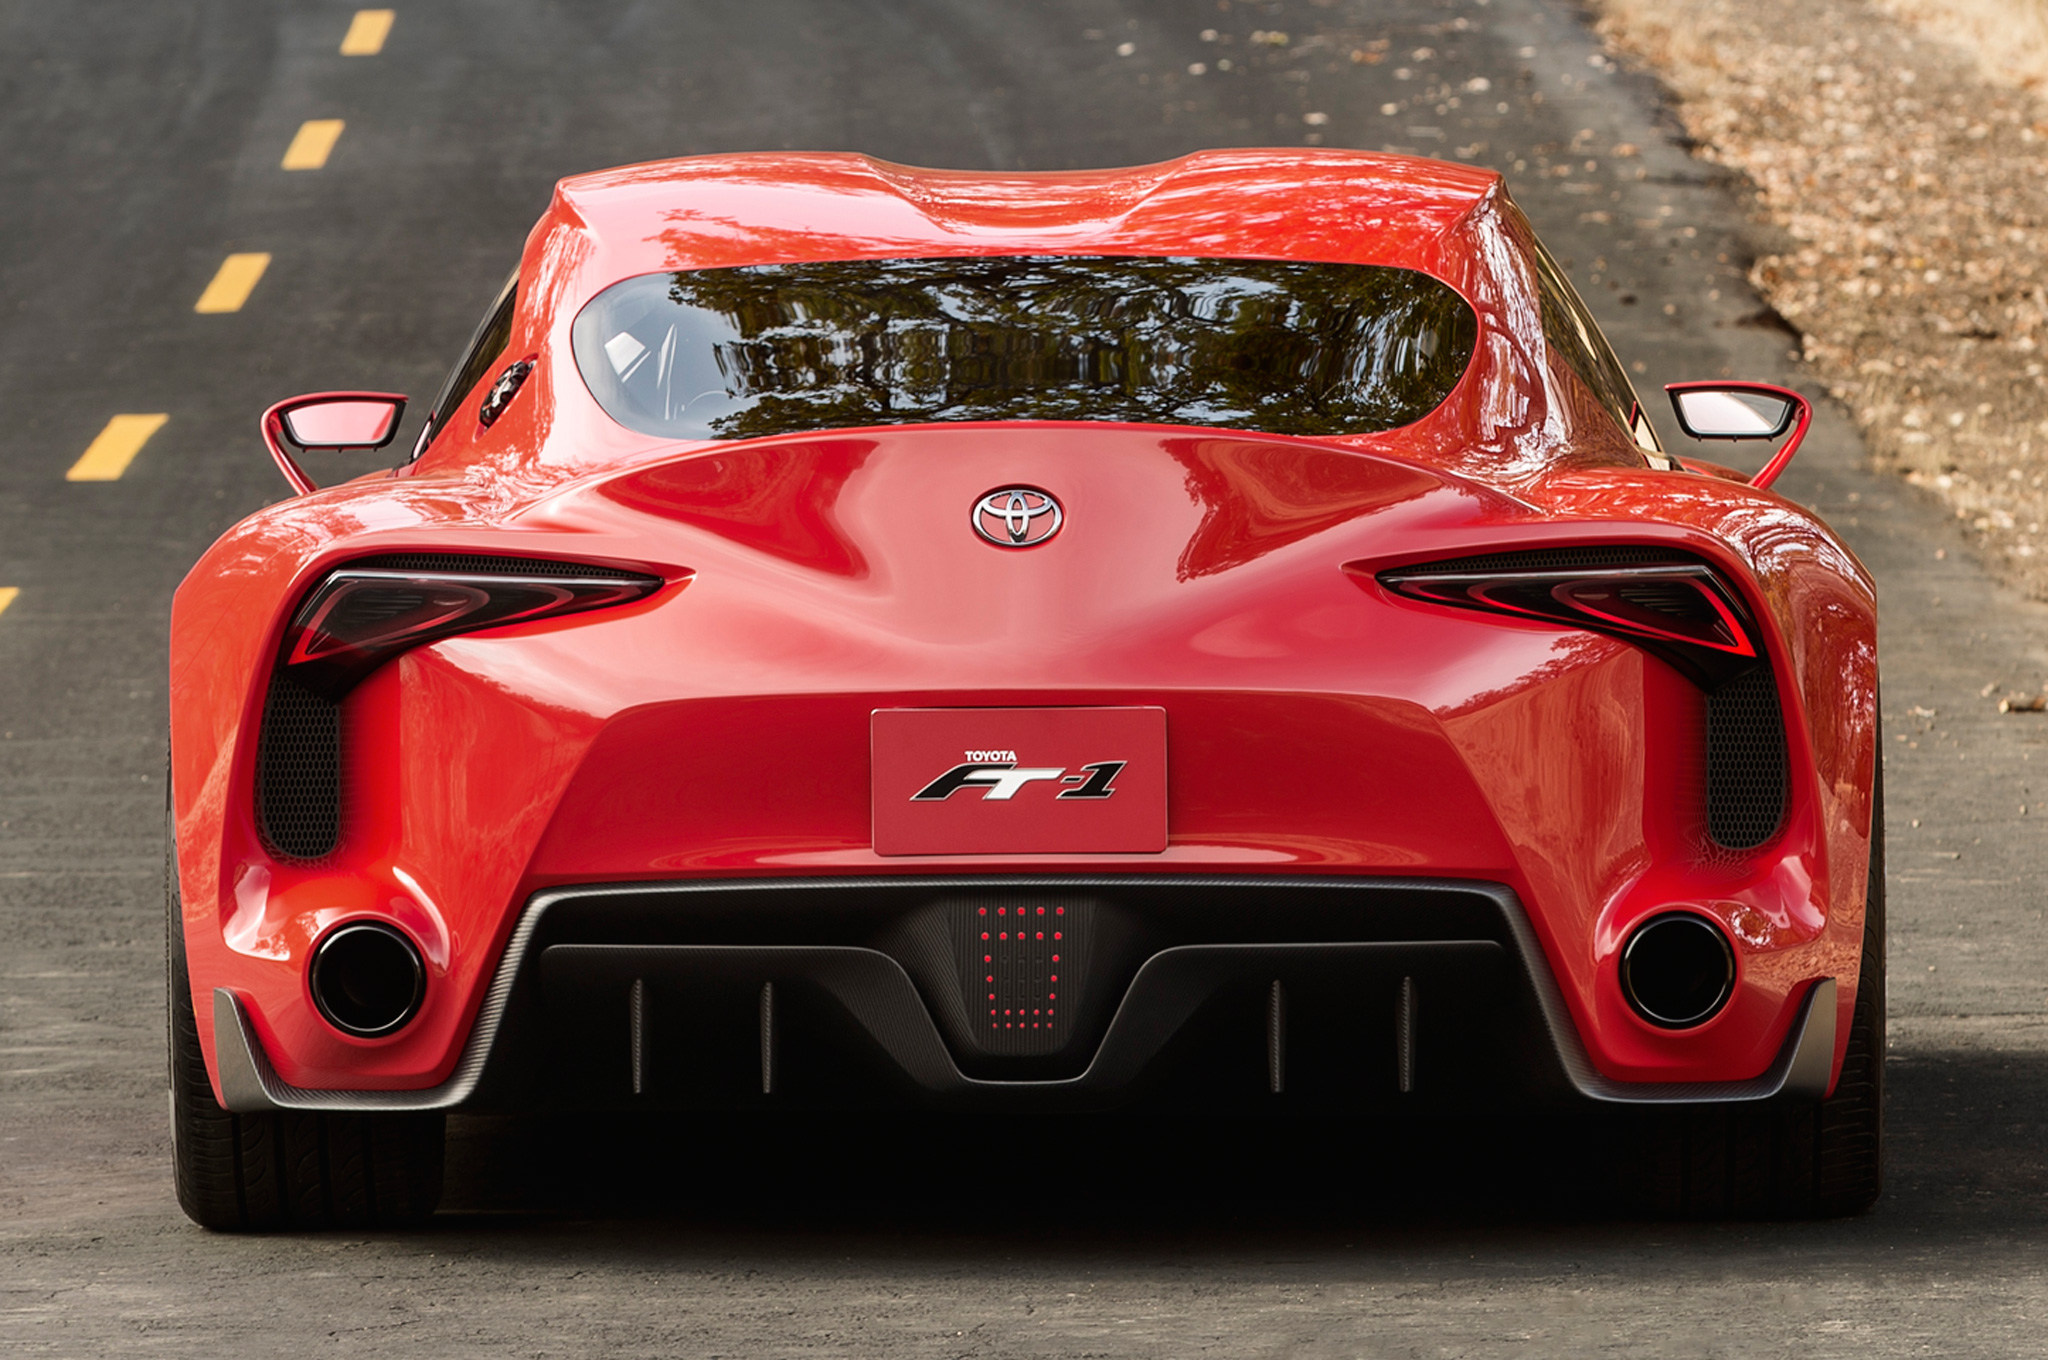 Toyota-FT-1-Concept-rear-view-on-road.jpg